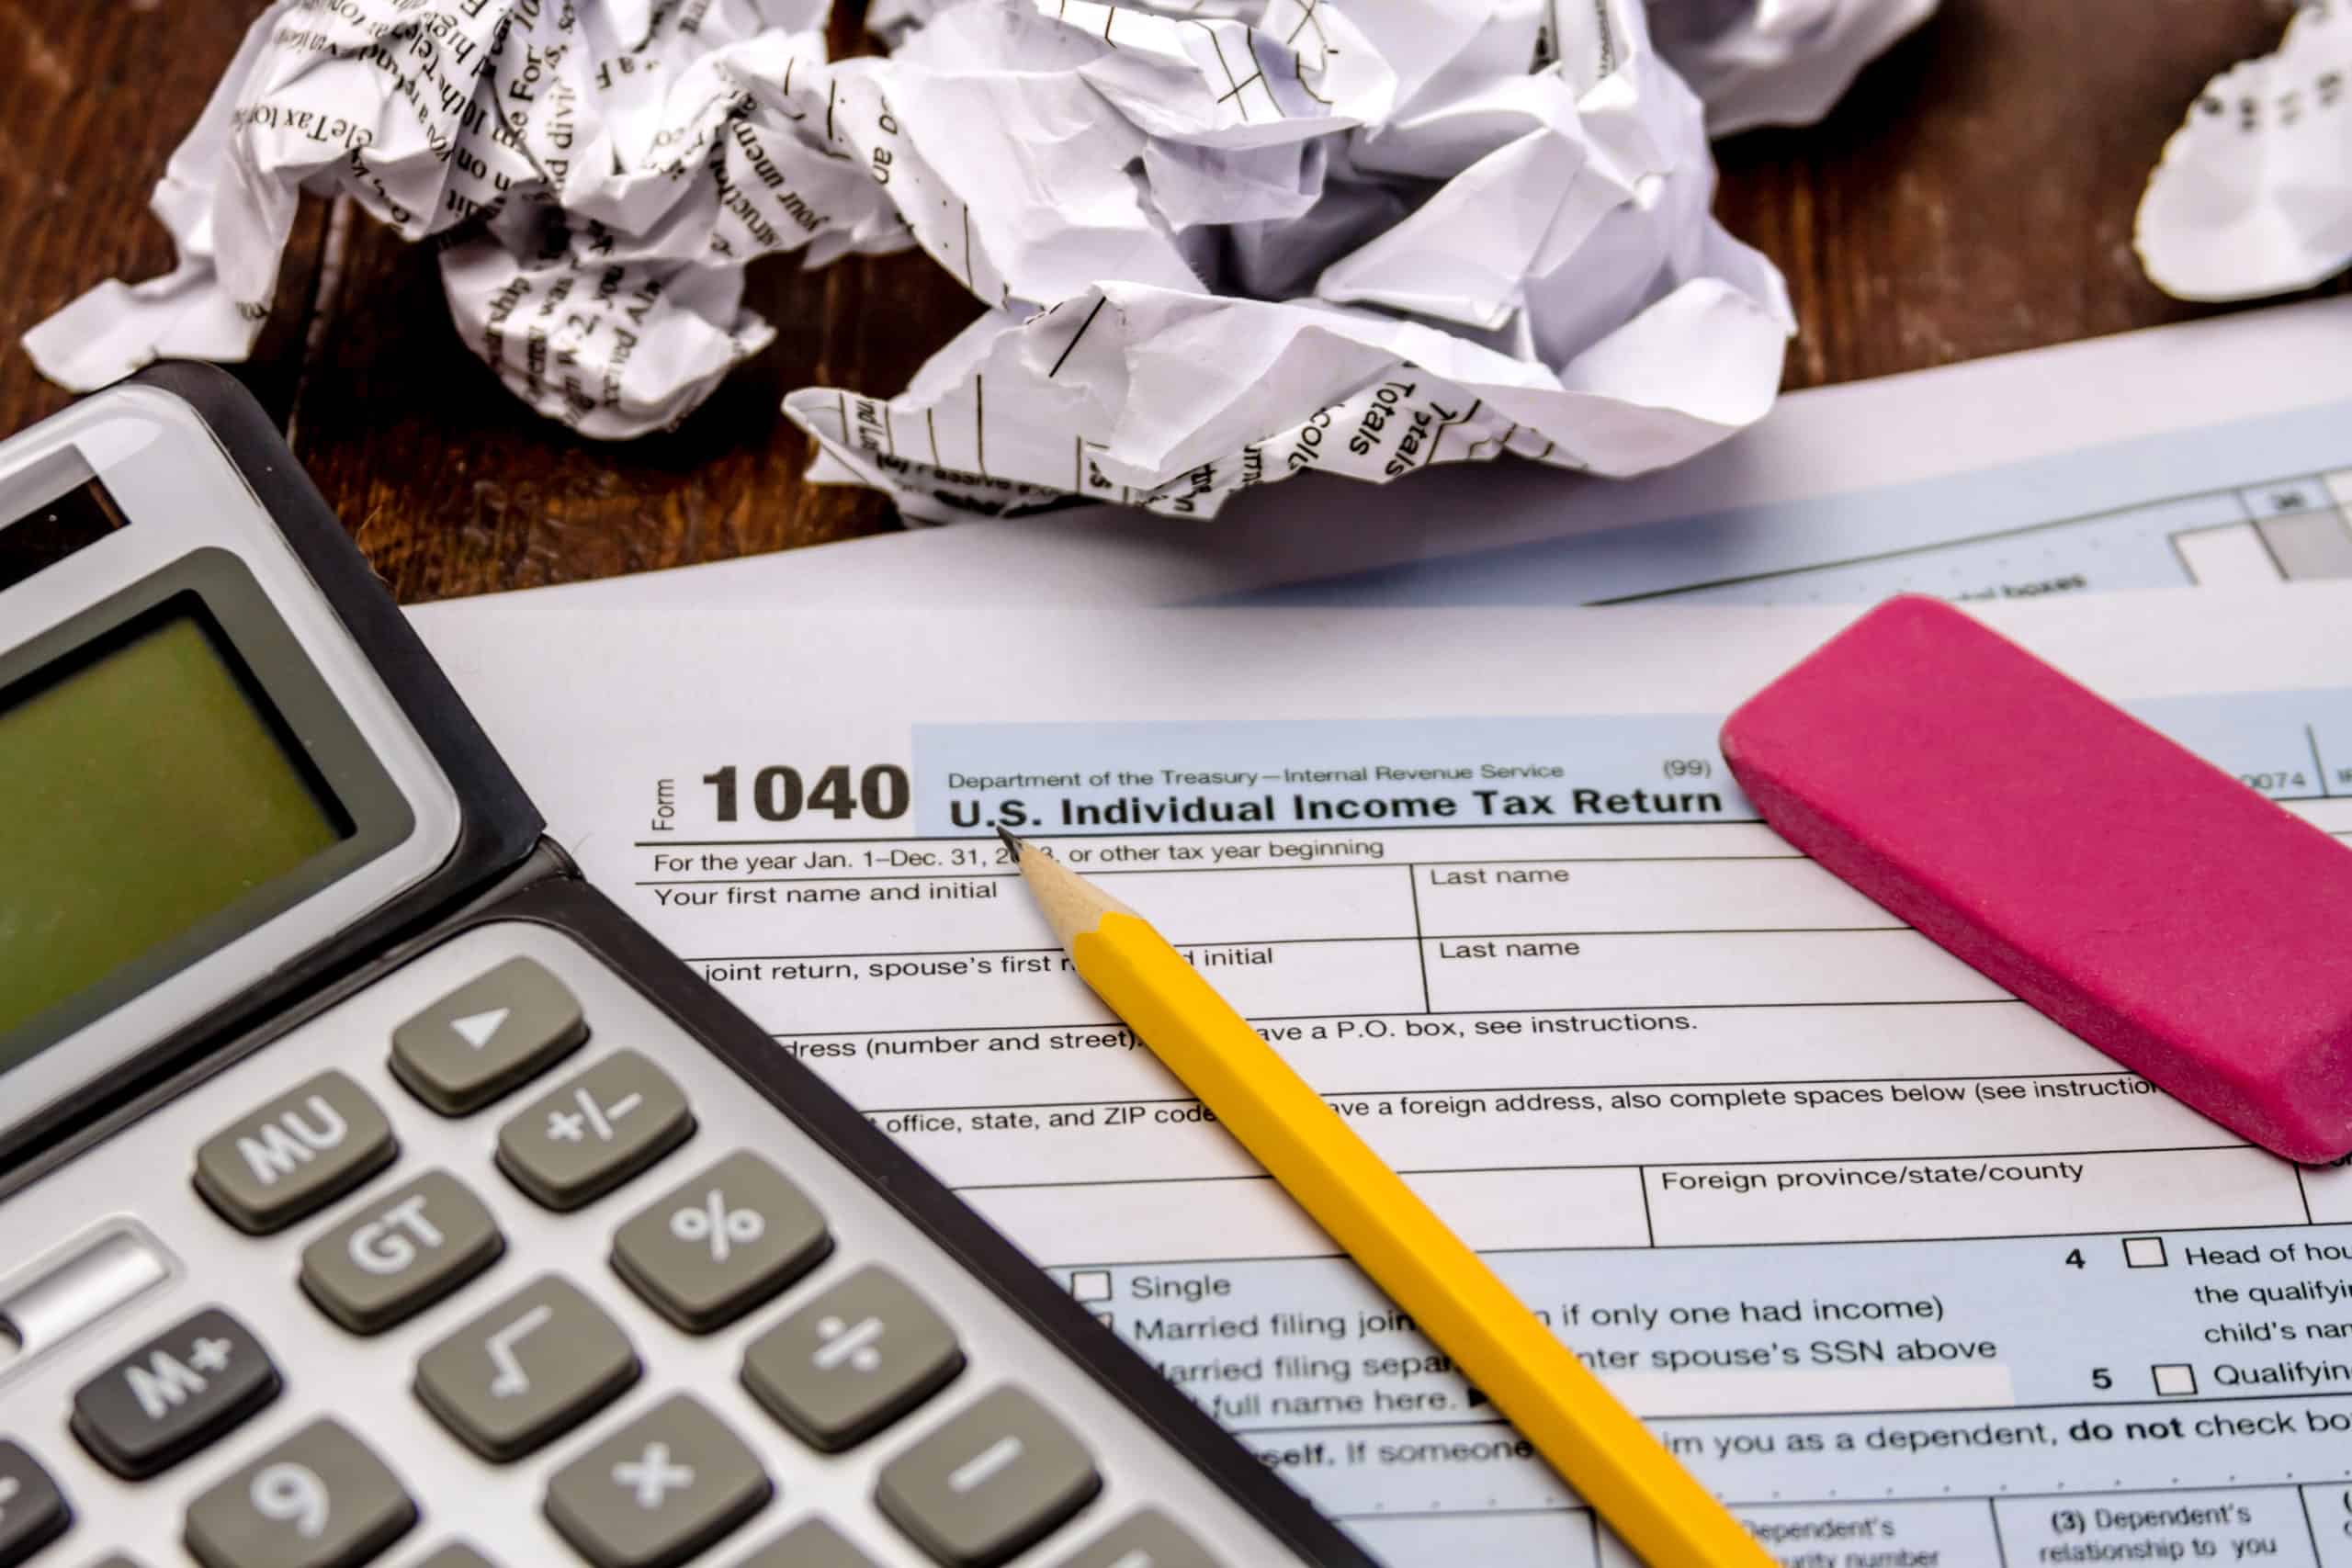 Income tax return Form 1040 with crumpled up forms, calculator, pink eraser and pencil